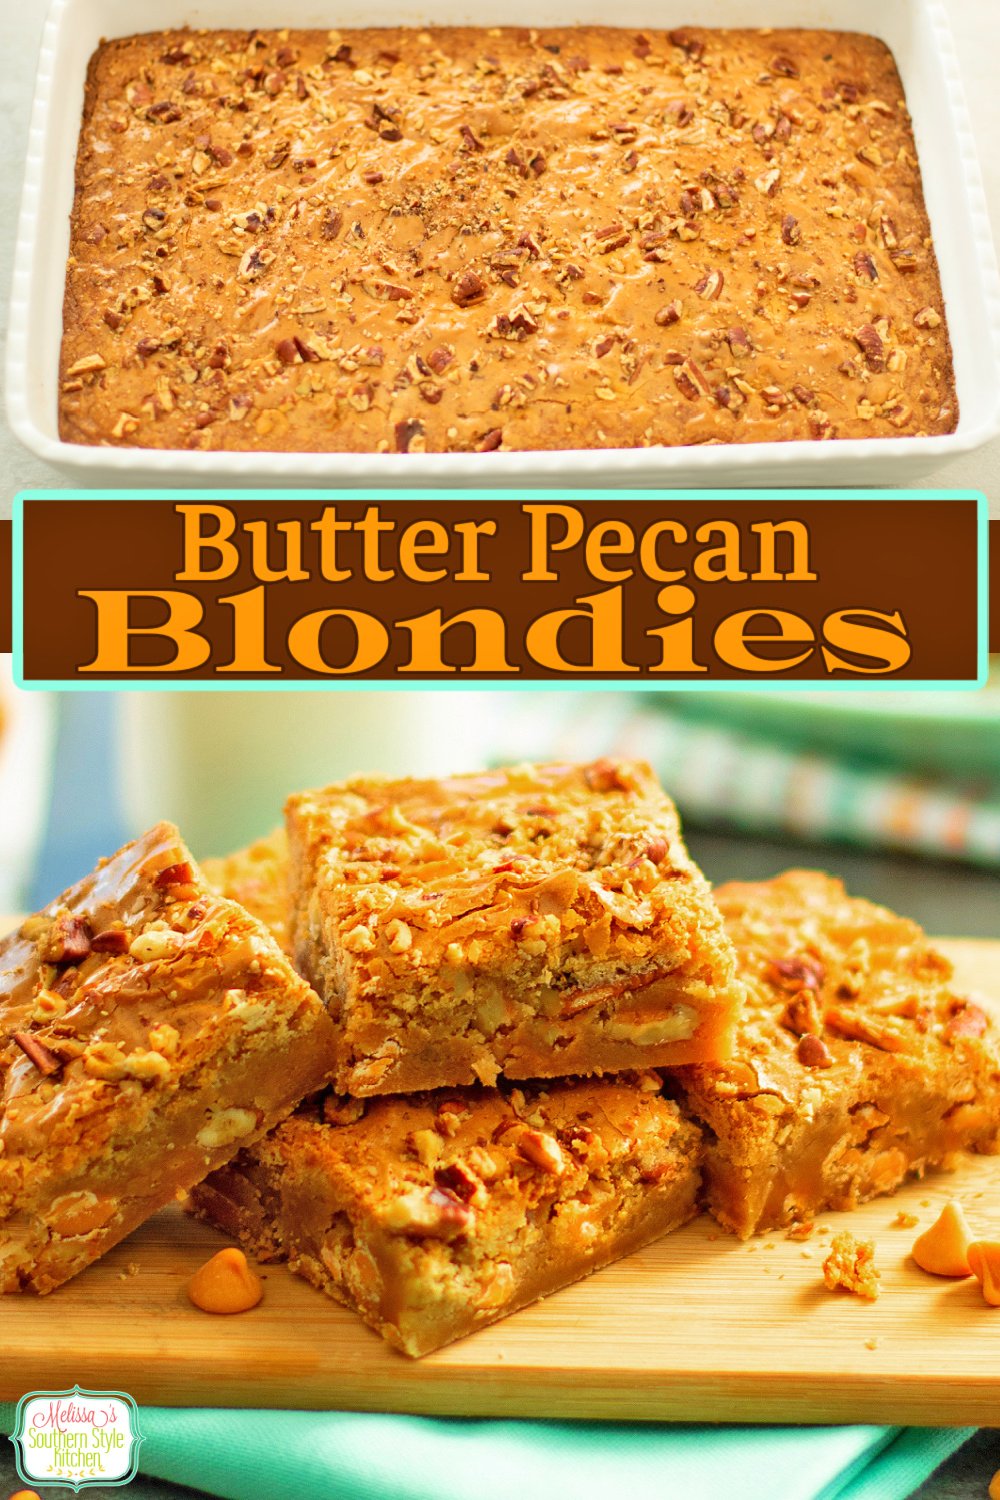 Enjoy these buttery homemade Butter Pecan Blondies with a cup of coffee, hot tea or glass of milk. #blondies #butterpecanblondies #bestblondiesrecipe #pecanbars #cookiebars #southerndesserts #southernrecipes via @melissasssk